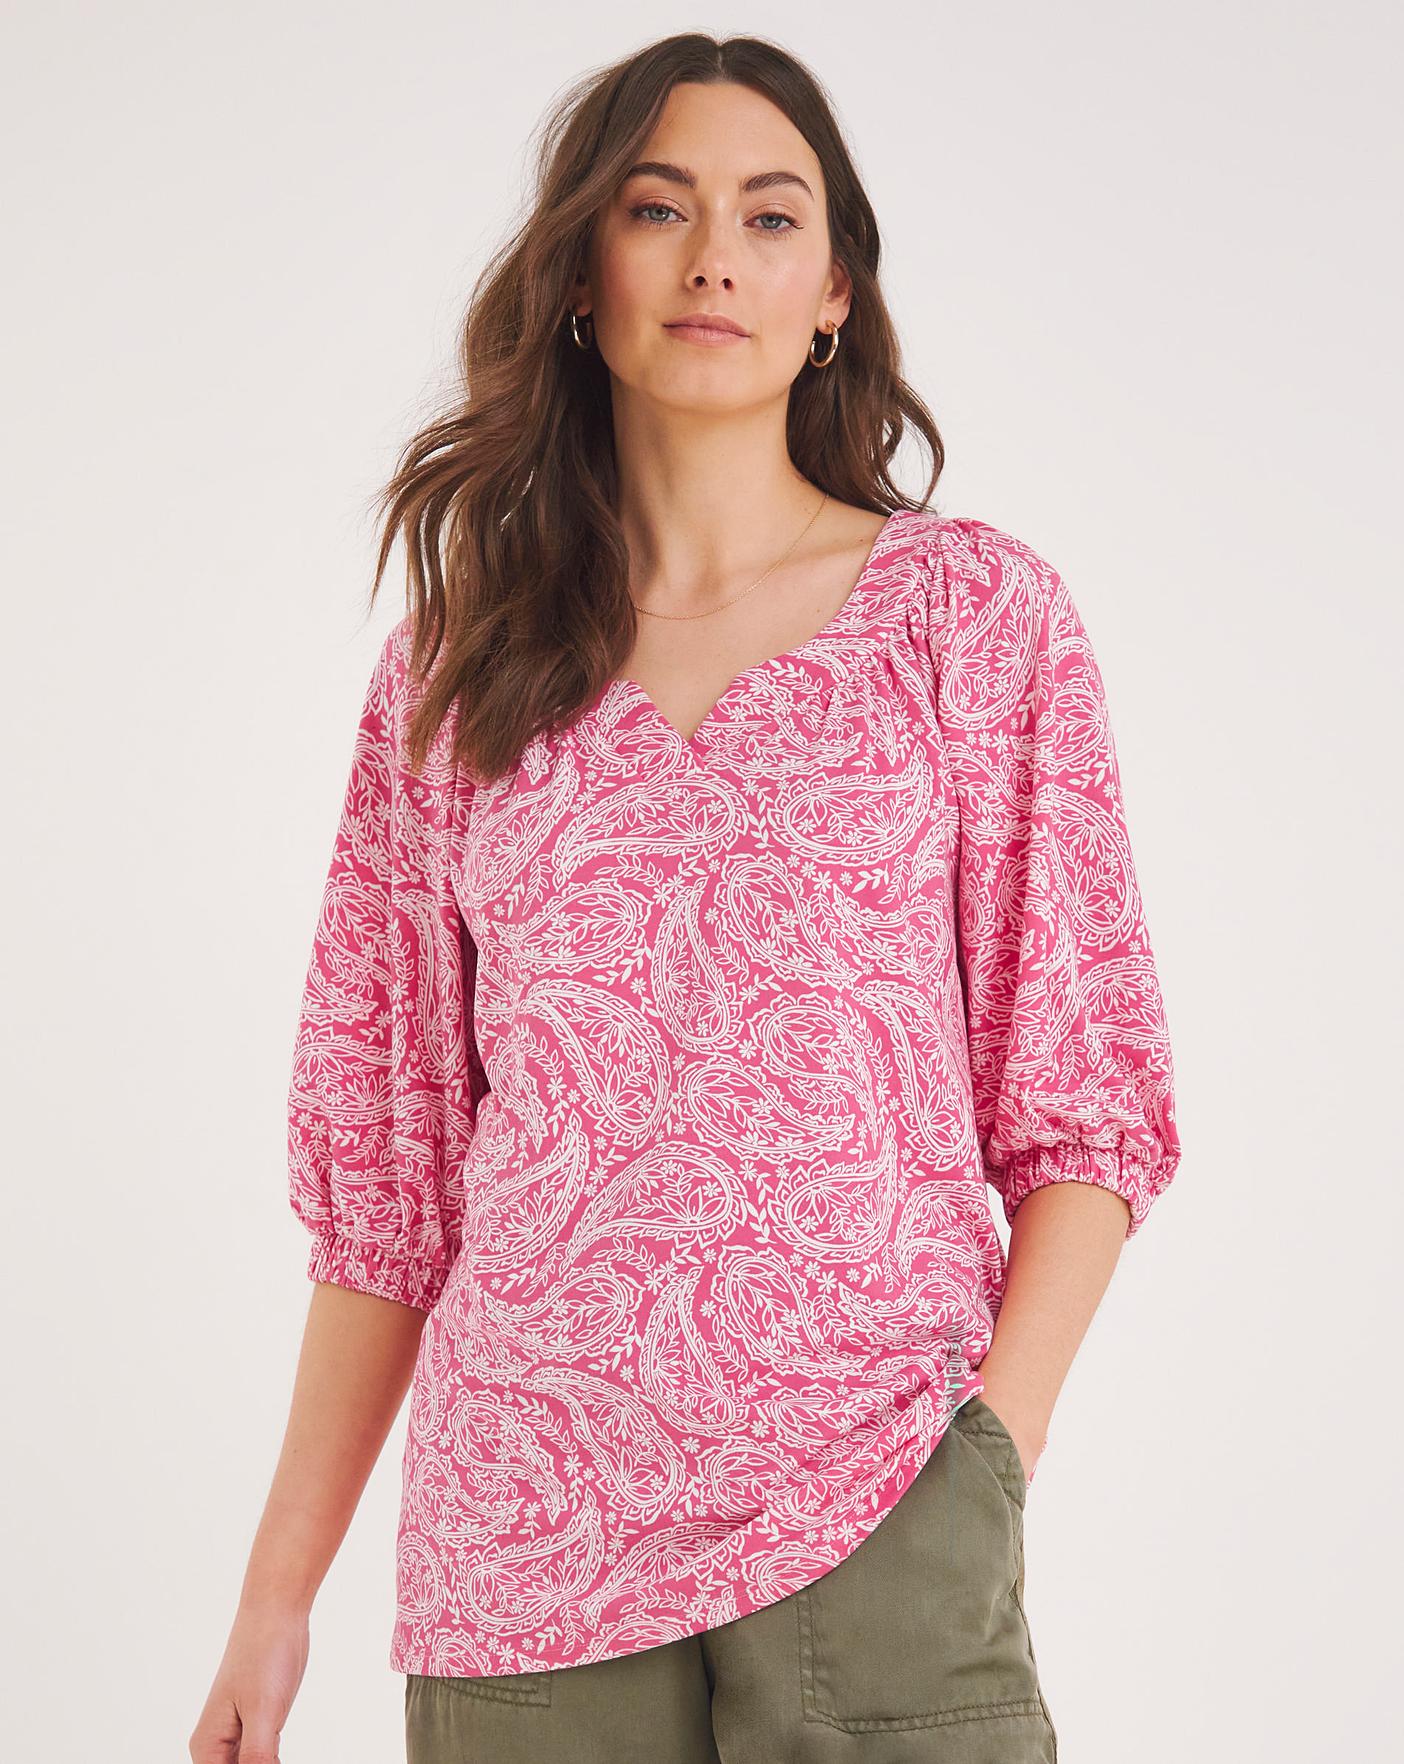 Lucky Brand Women's Paisley & Floral Peasant Top Pink Size Medium